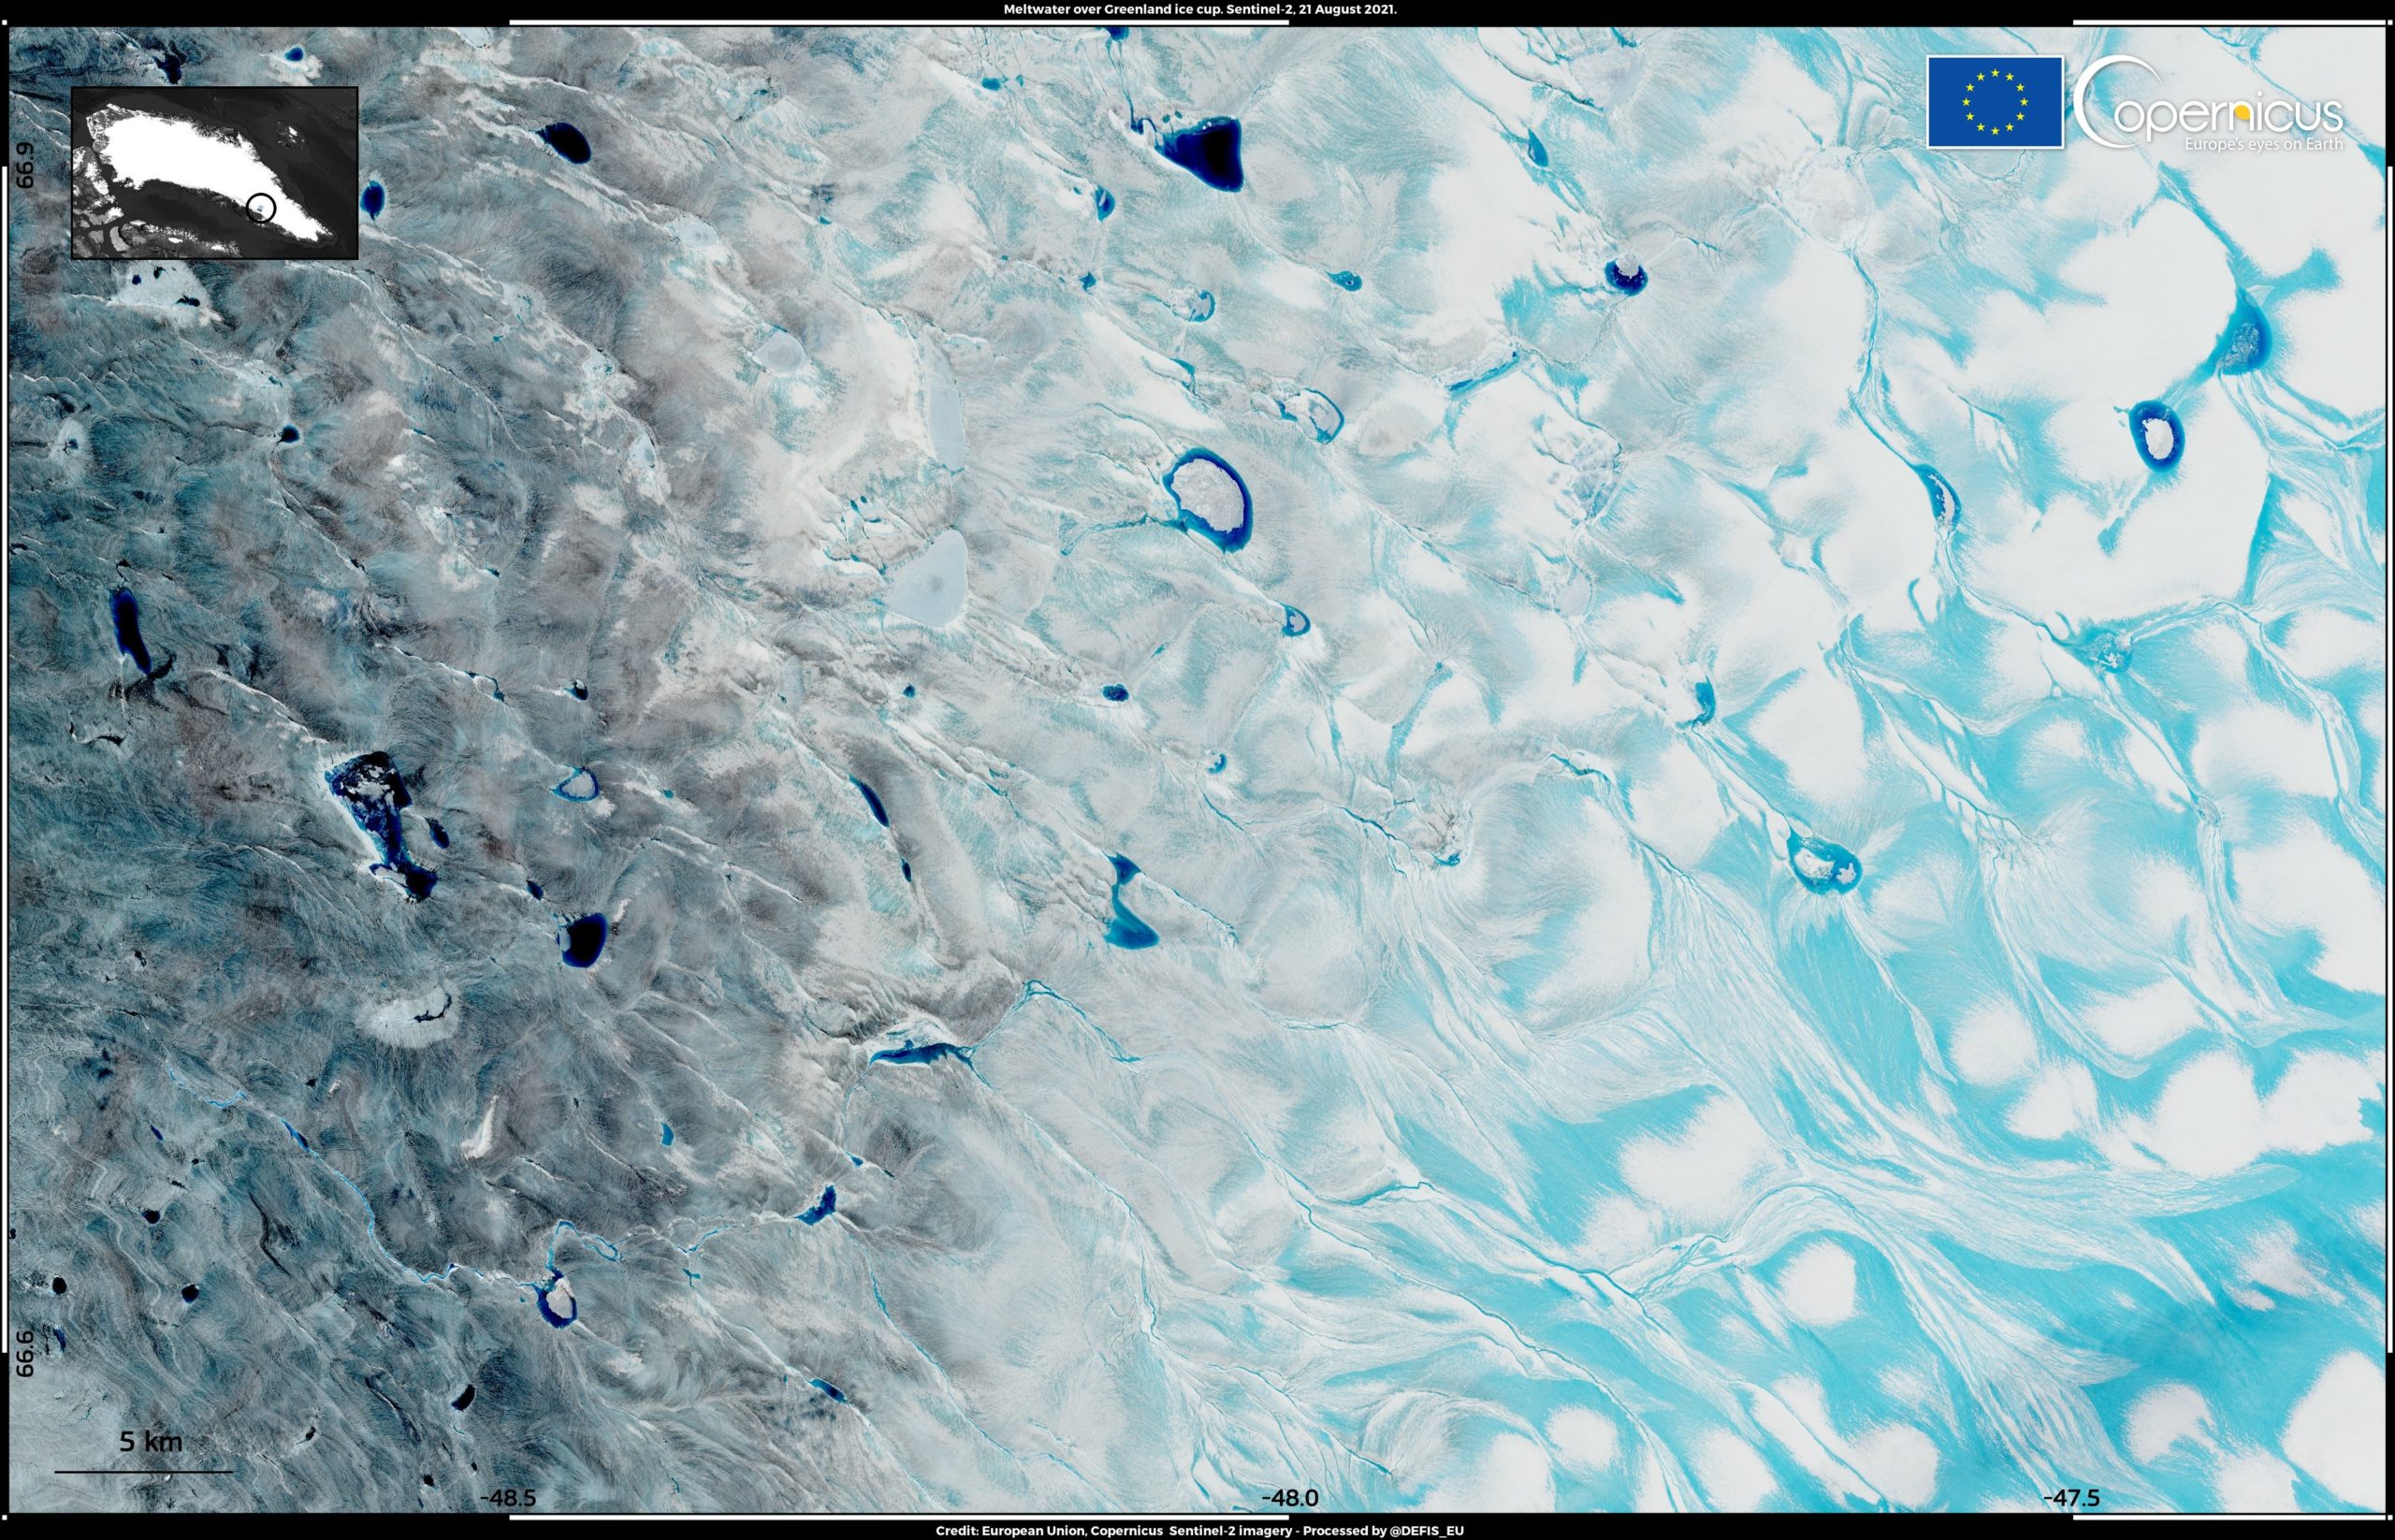 The full size view of the satellite image. (Image: European Union, Copernicus Sentinel-2 imagery)